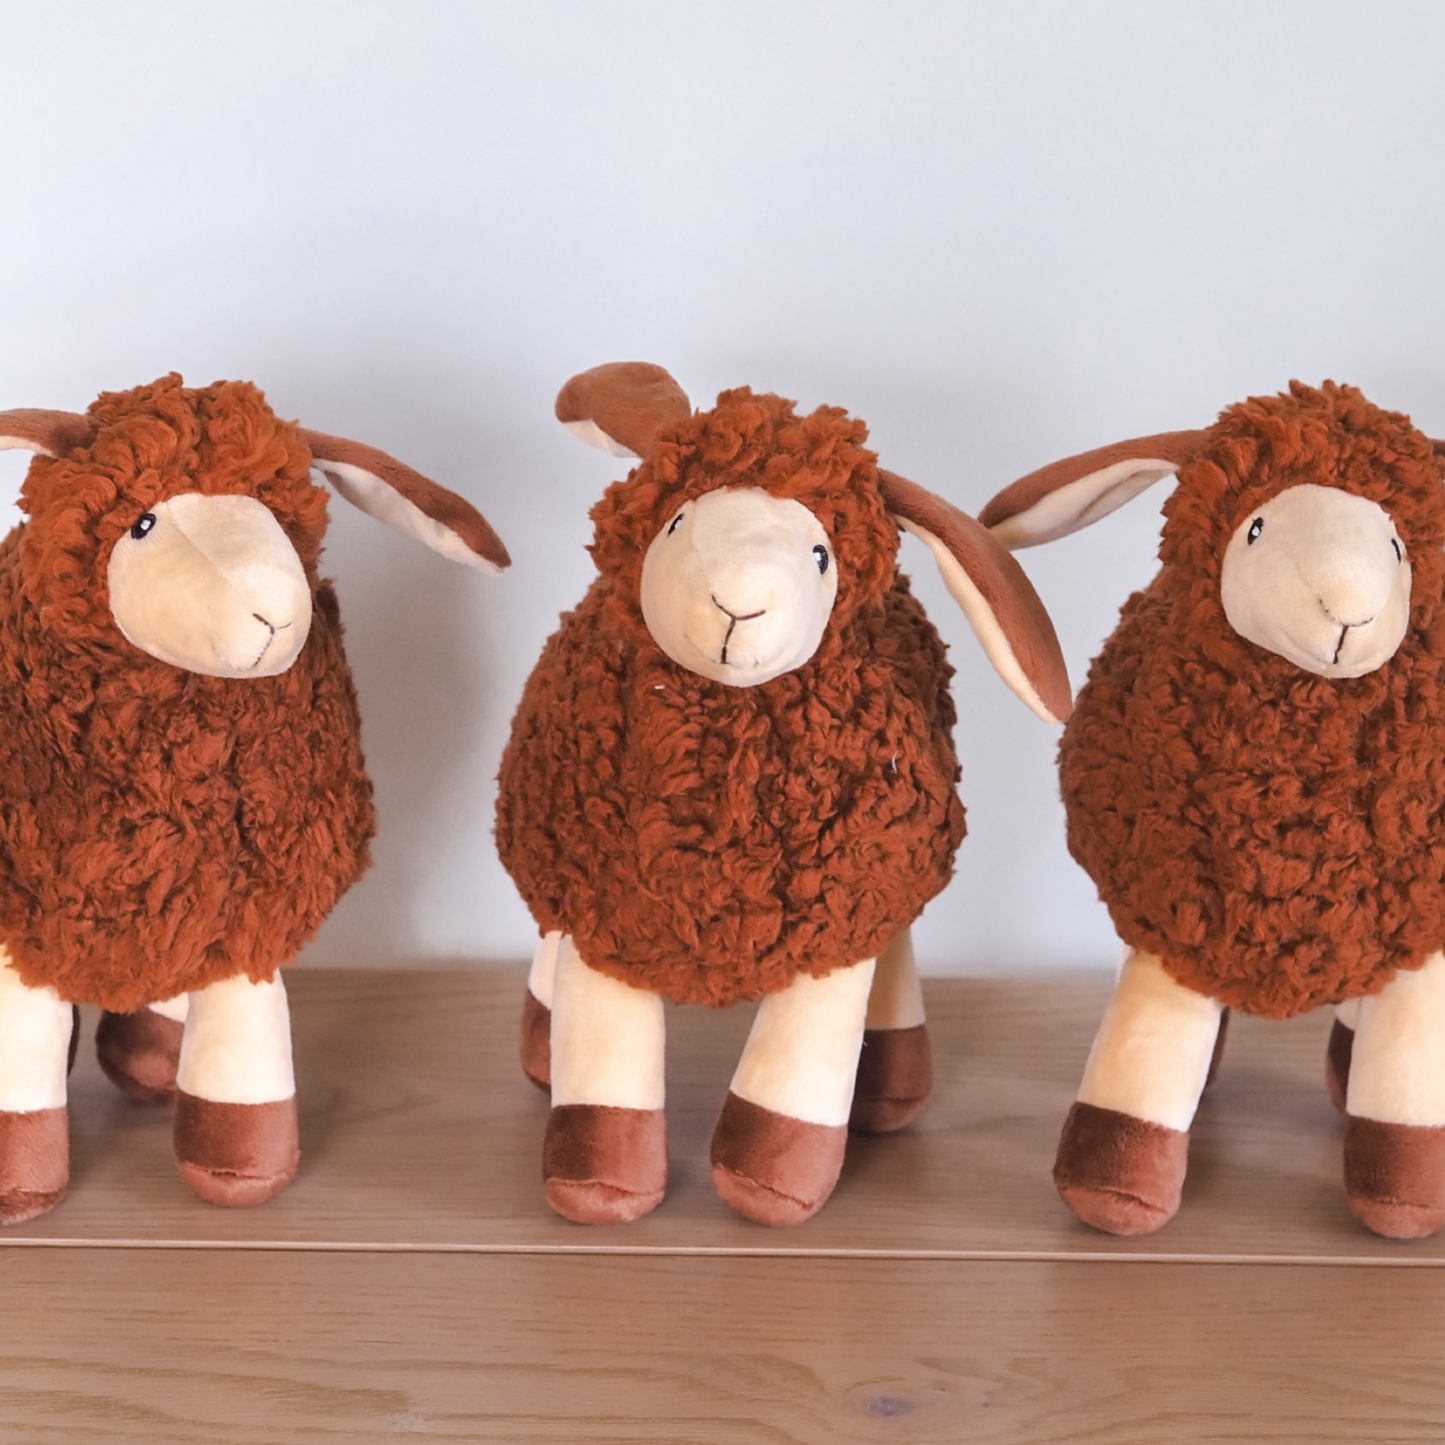 3 Plushie Luxury Squeaky Sheep Dog Toys standing in a row by Border Loves